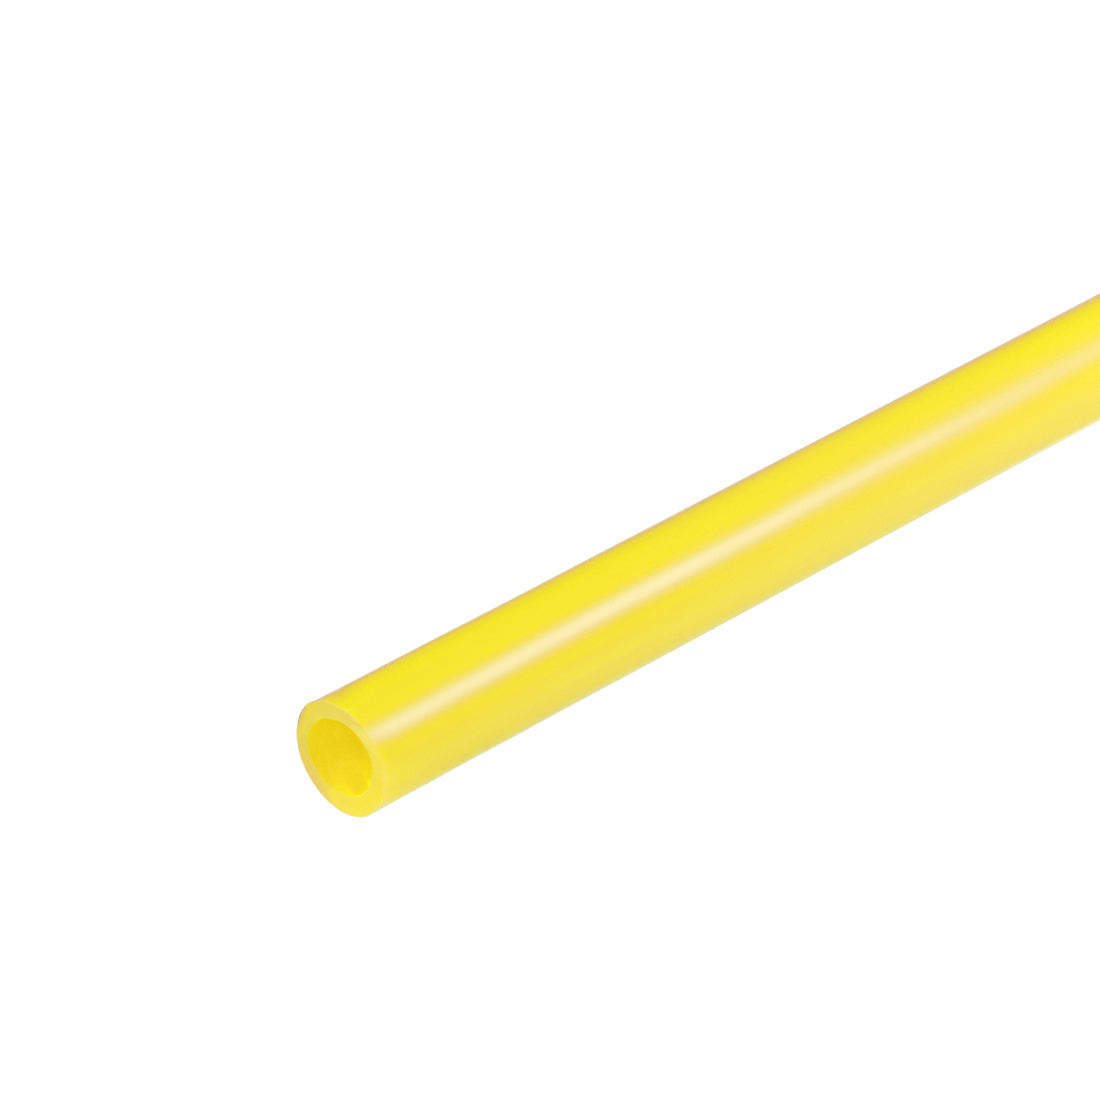 Uxcell Uxcell Silicone Tubing, 5/16 inch ID x 1/2 inch OD 3.3ft Rubber Tube High Temp, Yellow